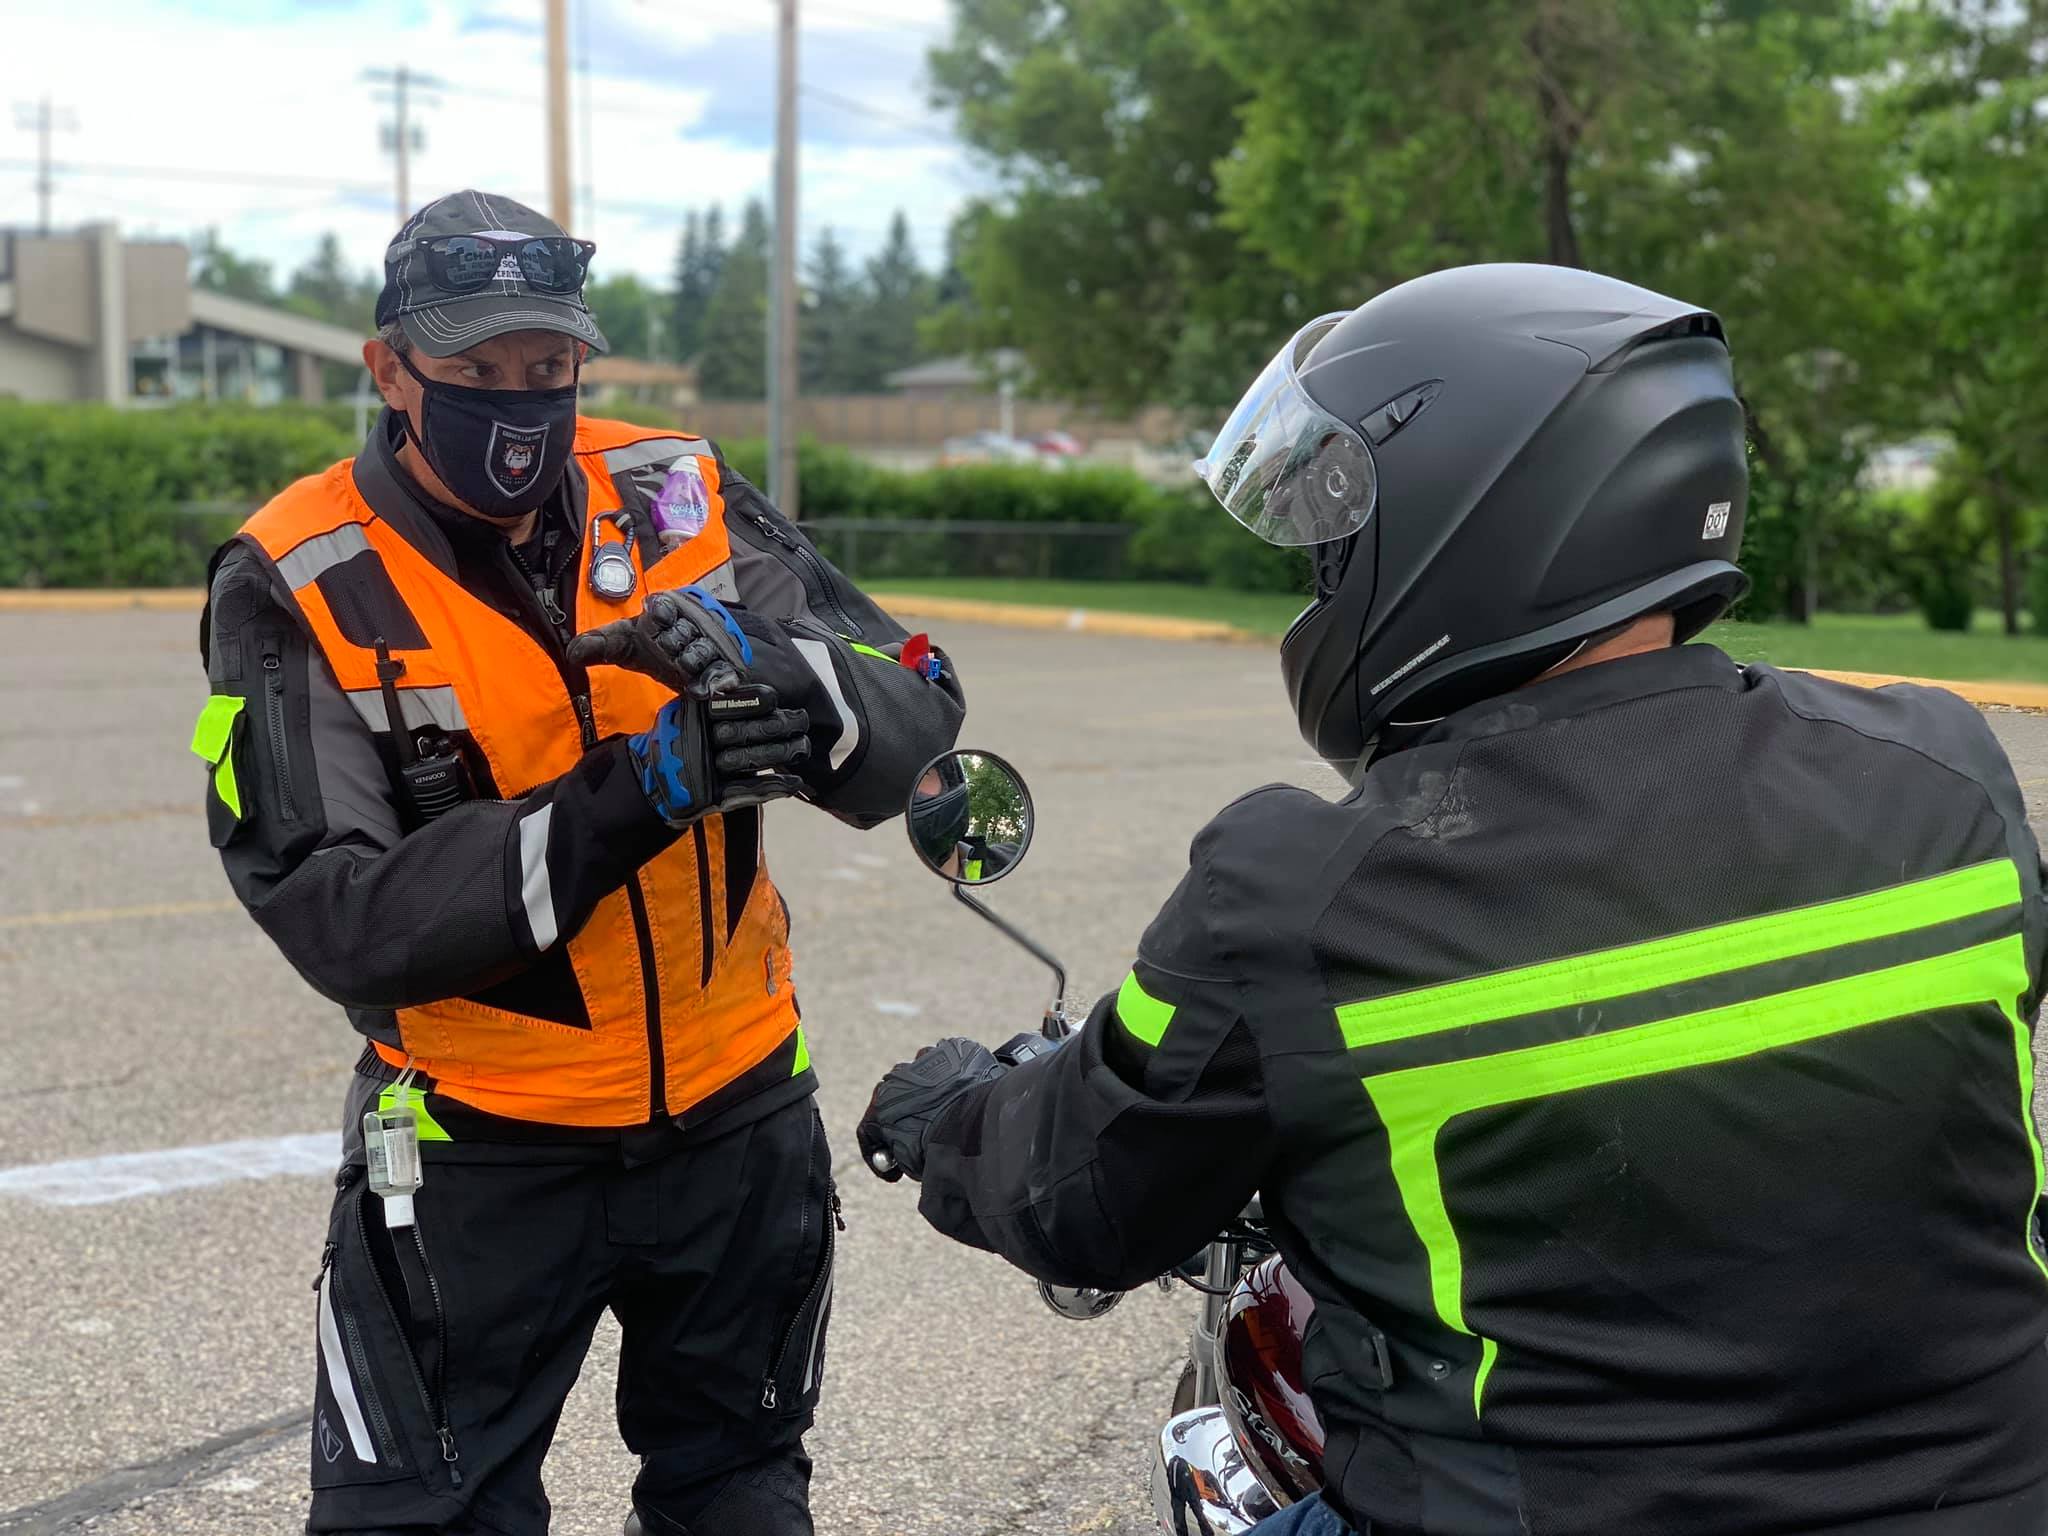 Motorcycle instructor teaching a new rider